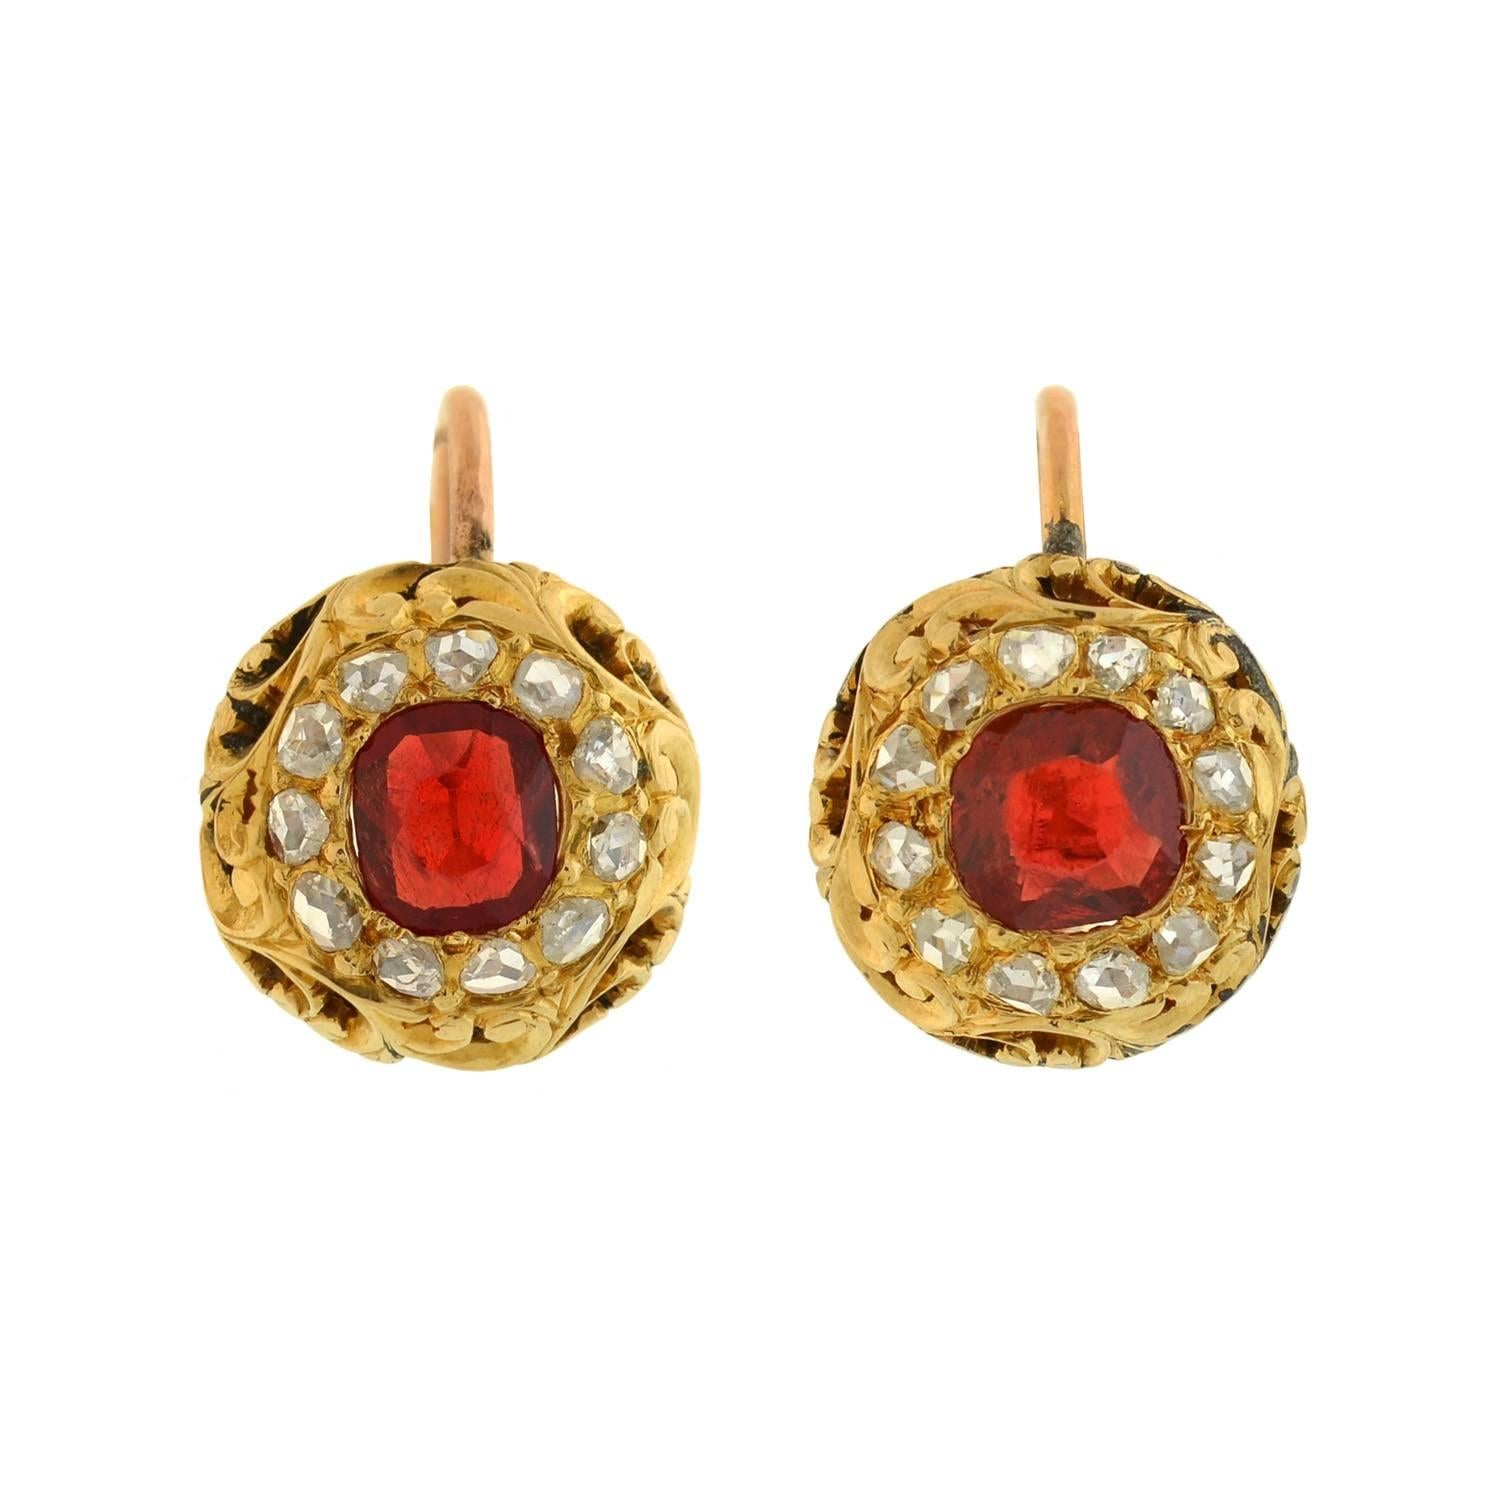 Victorian GIA Certified Natural Red Spinel Rose Cut Diamond Earrings